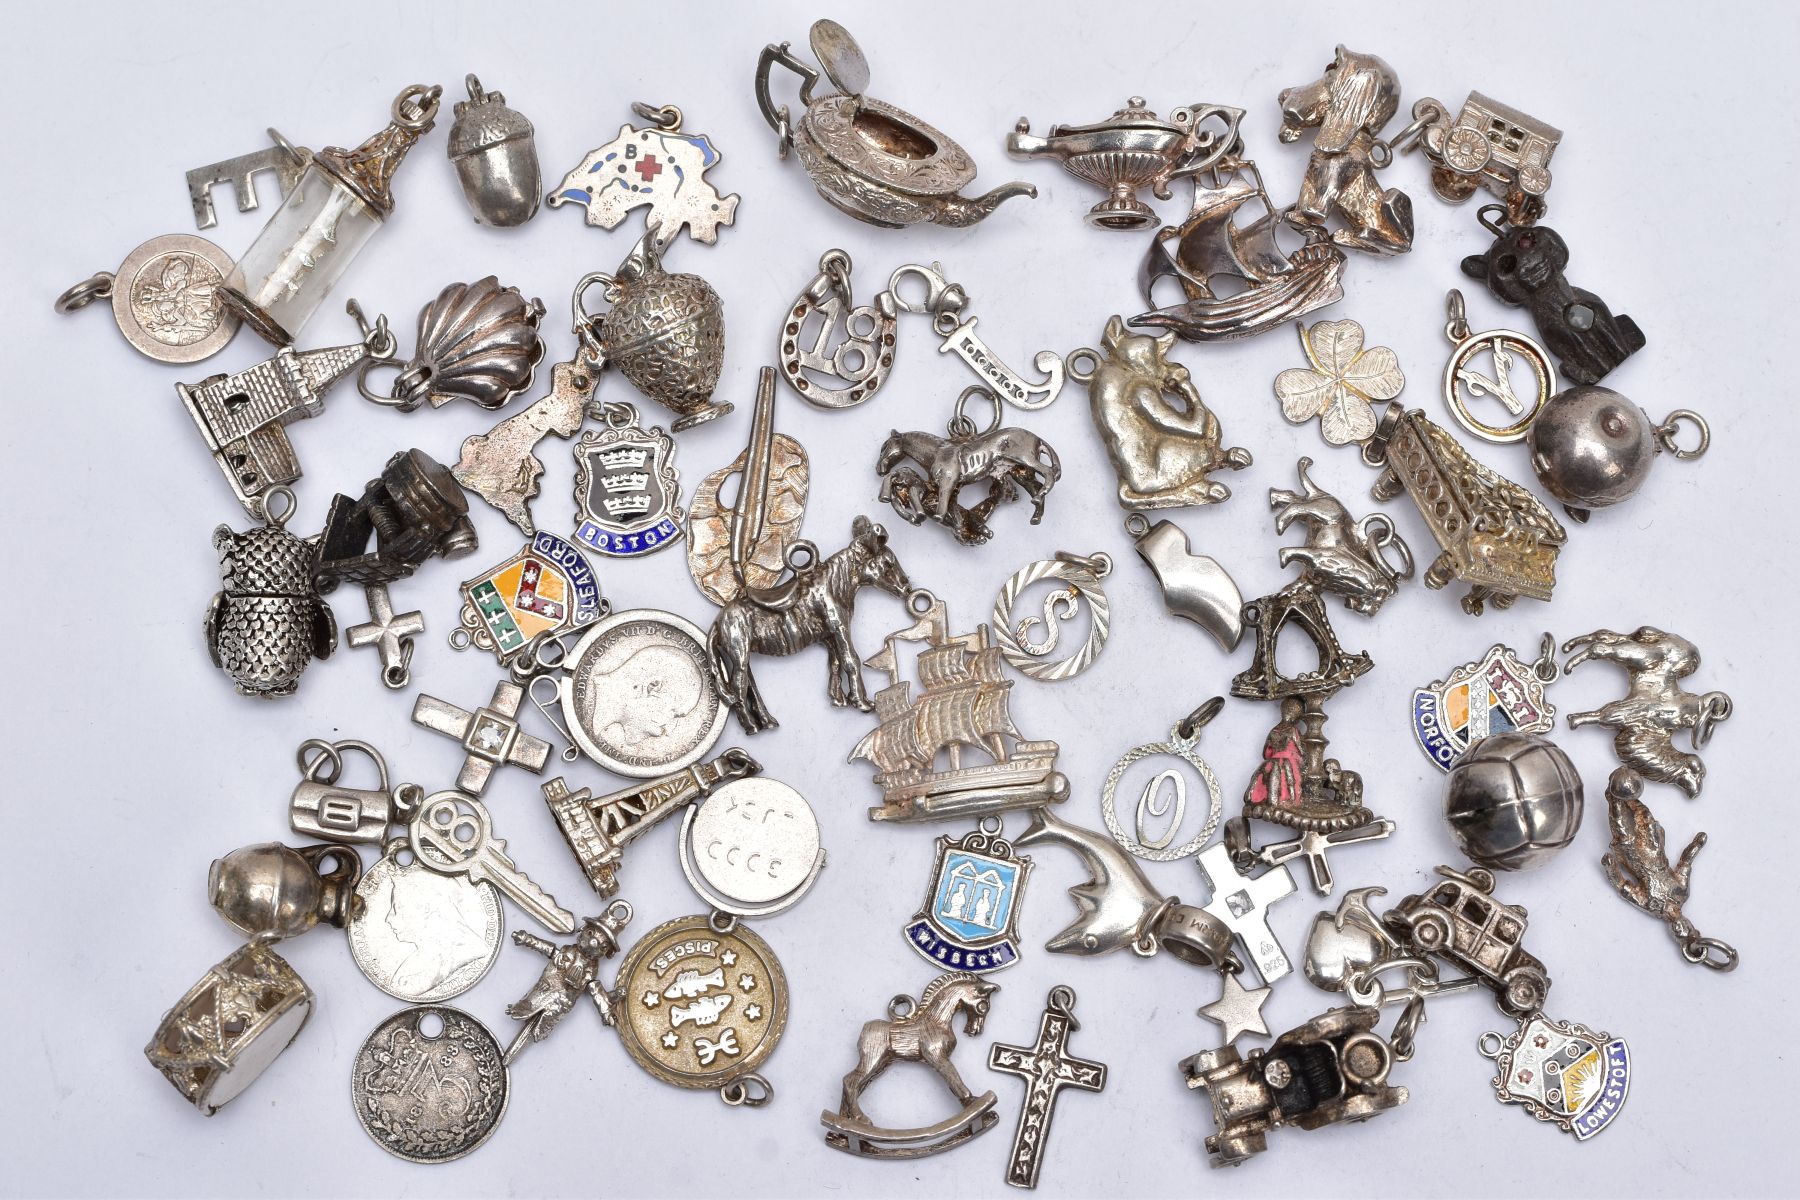 A BAG OF ASSORTED SILVER AND WHITE METAL CHARMS, to include sixty four charms in various forms